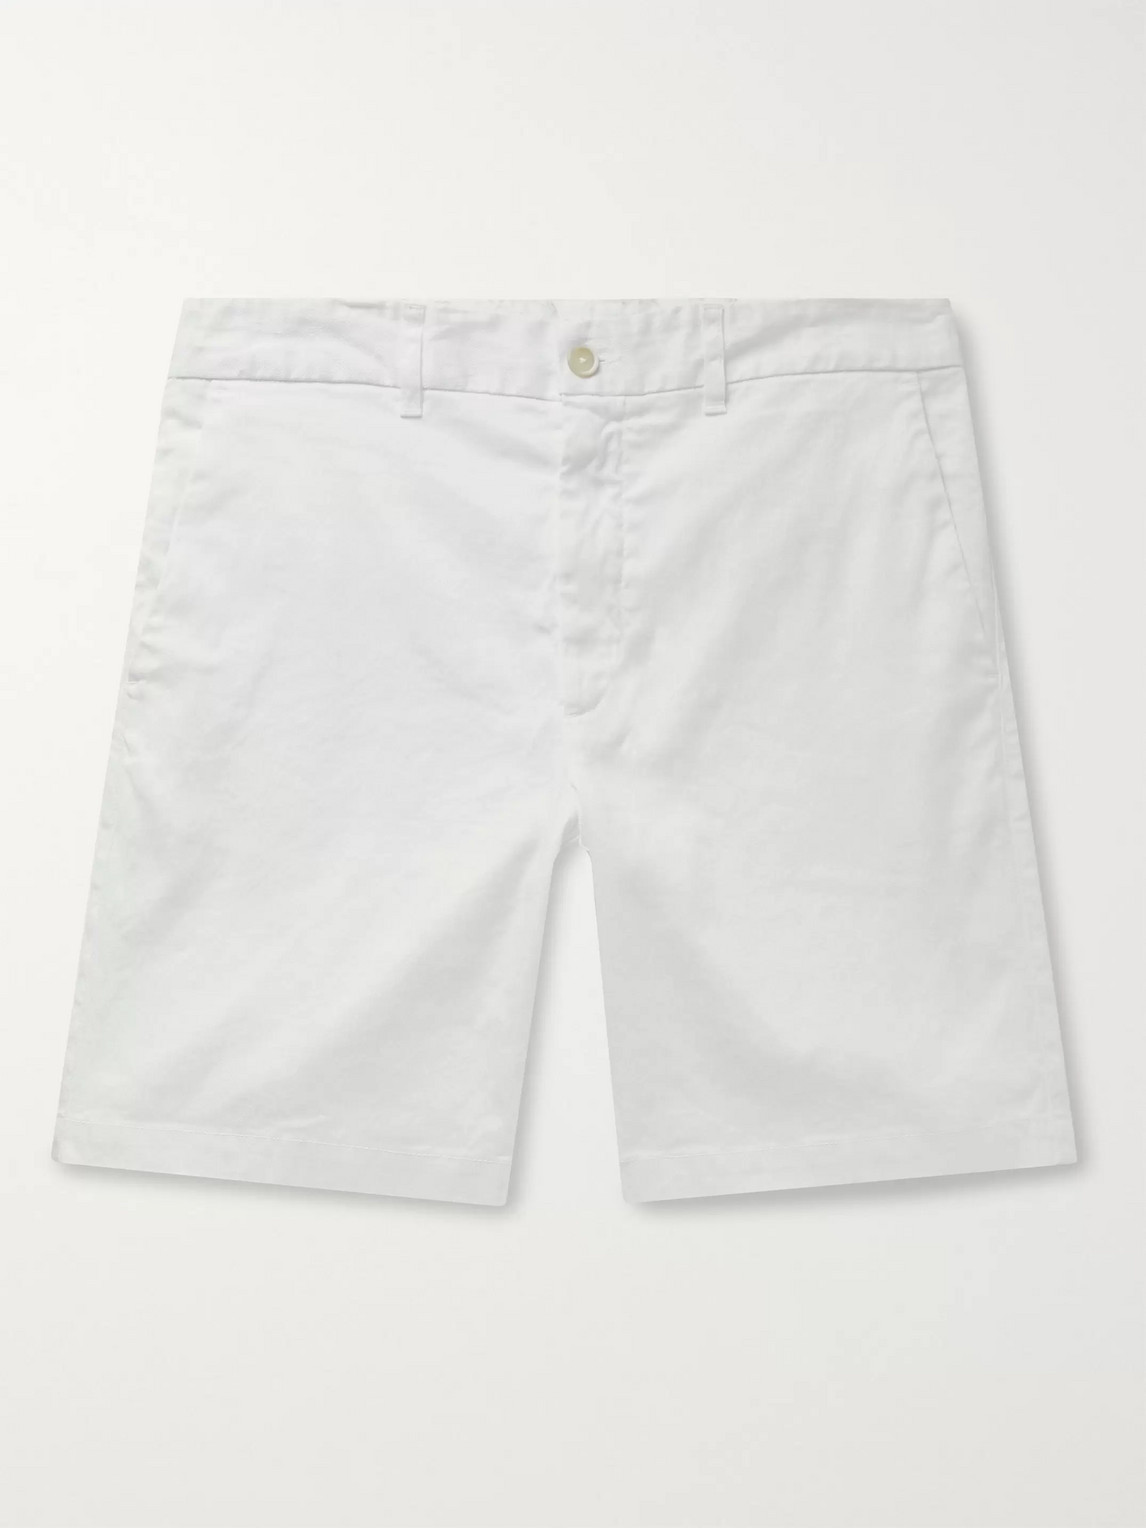 120% SLIM-FIT GARMENT-DYED STRETCH LINEN AND COTTON-BLEND TWILL SHORTS